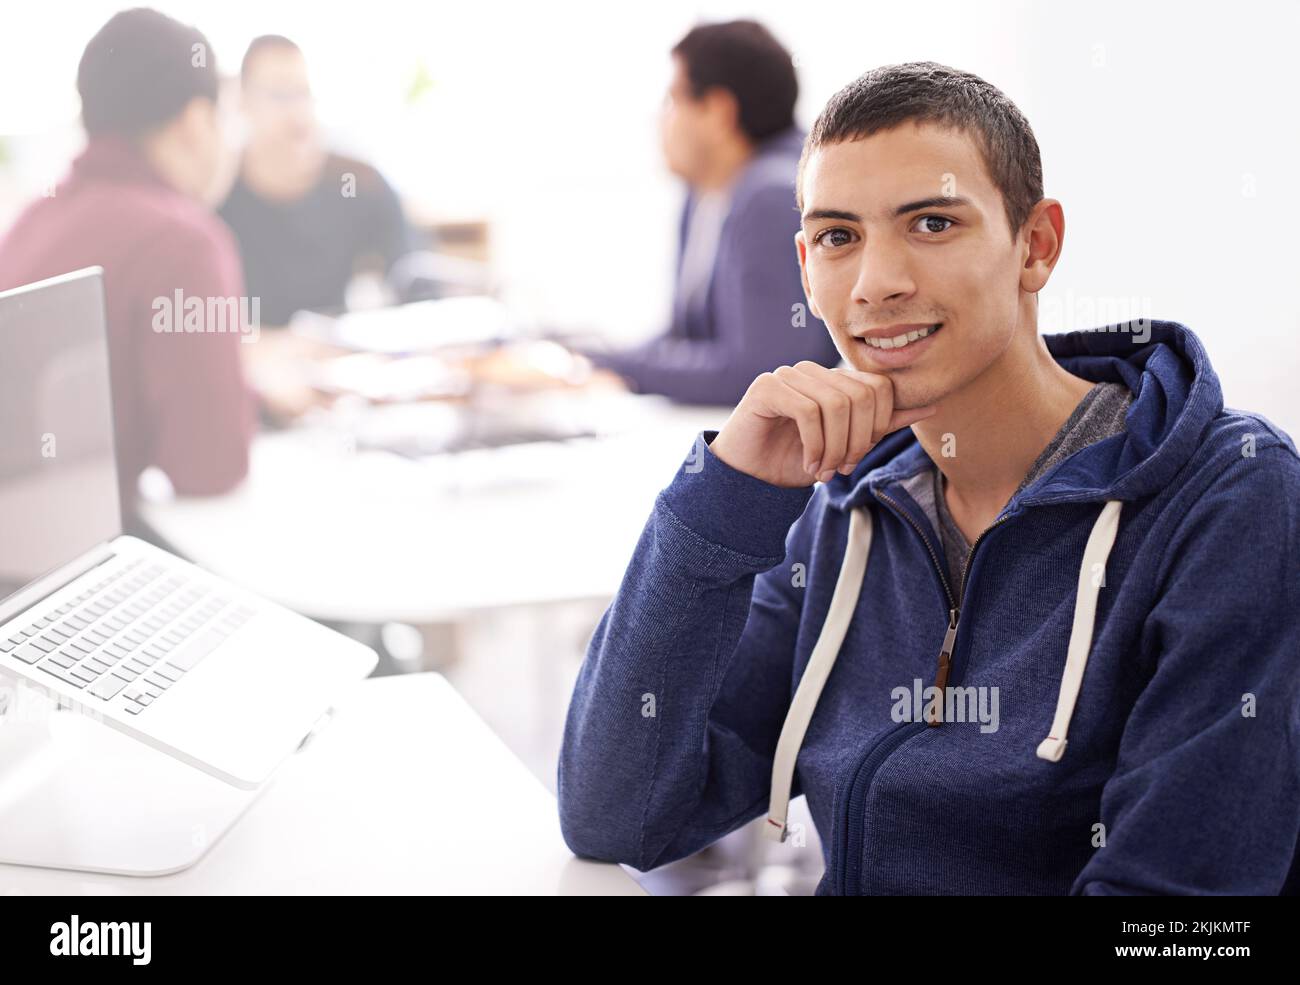 We practice excellence in everything we do. Portrait of a confident young man working on his laptop in an office. Stock Photo